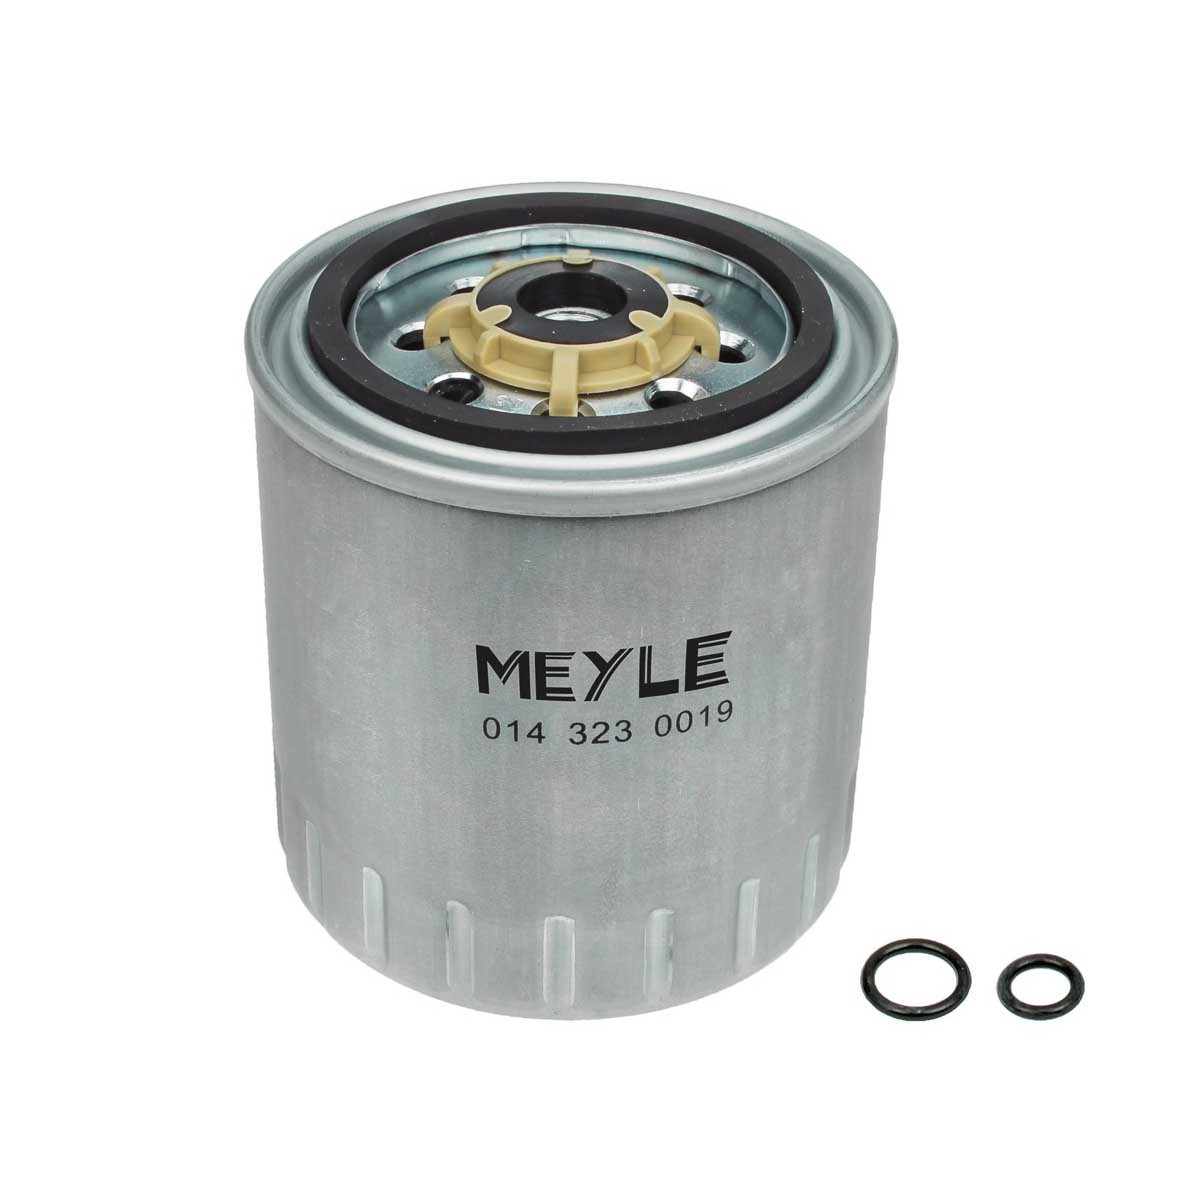 Great value for money - MEYLE Fuel filter 014 323 0019